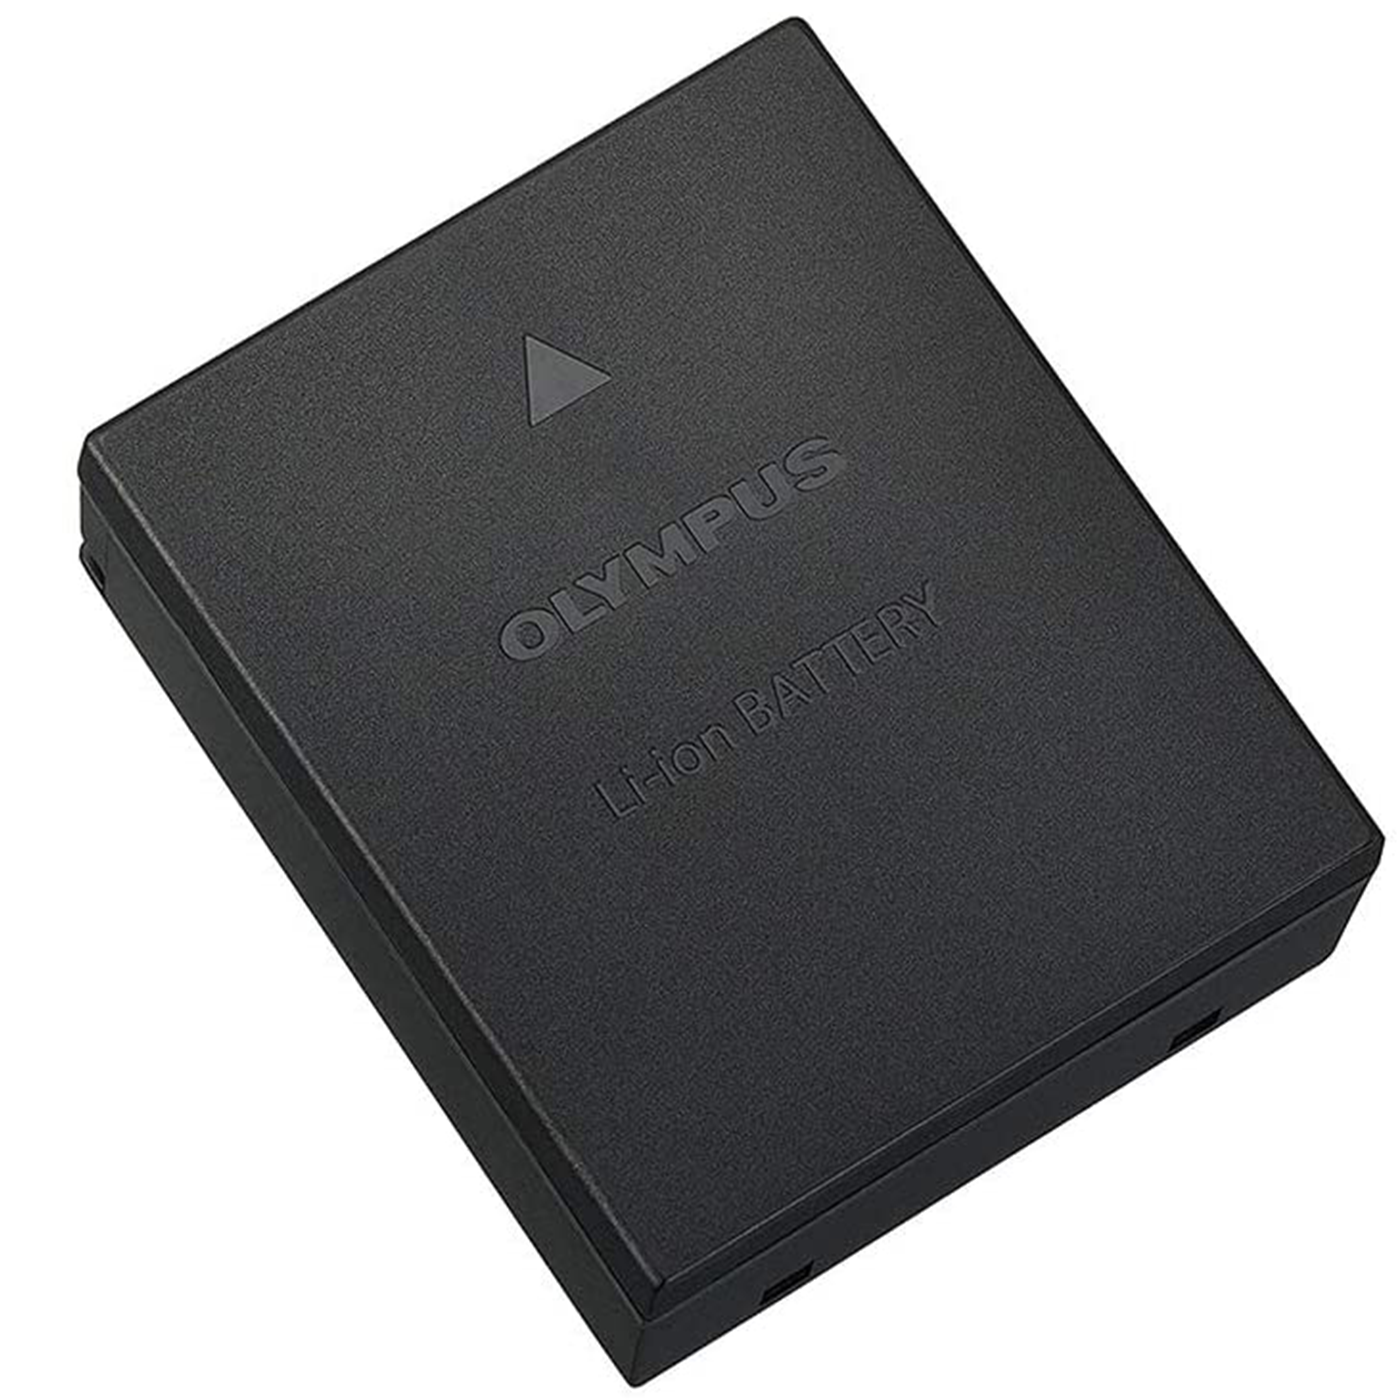 Olympus BLH-1 Lithium-Ion Battery 